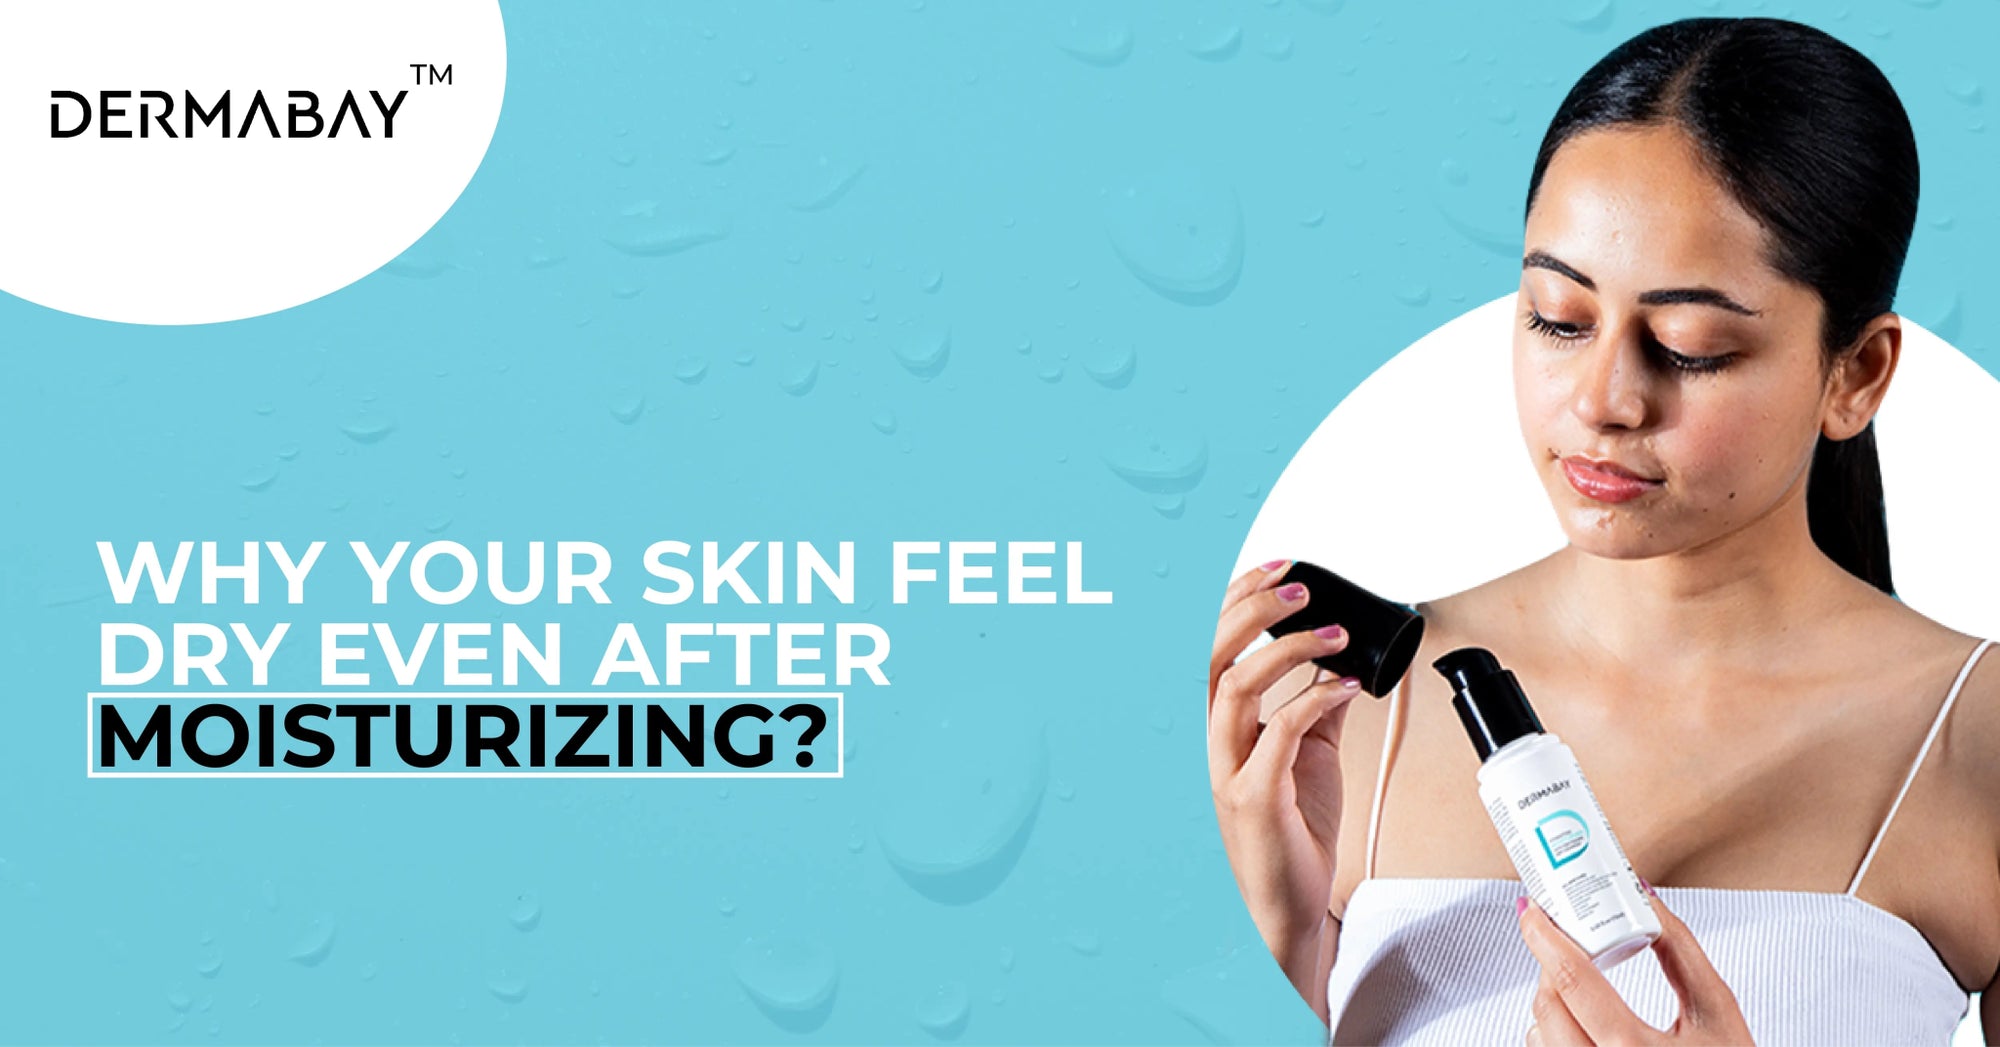 Why Your Skin Feels Dry Even After Moisturizing? - Dermabay